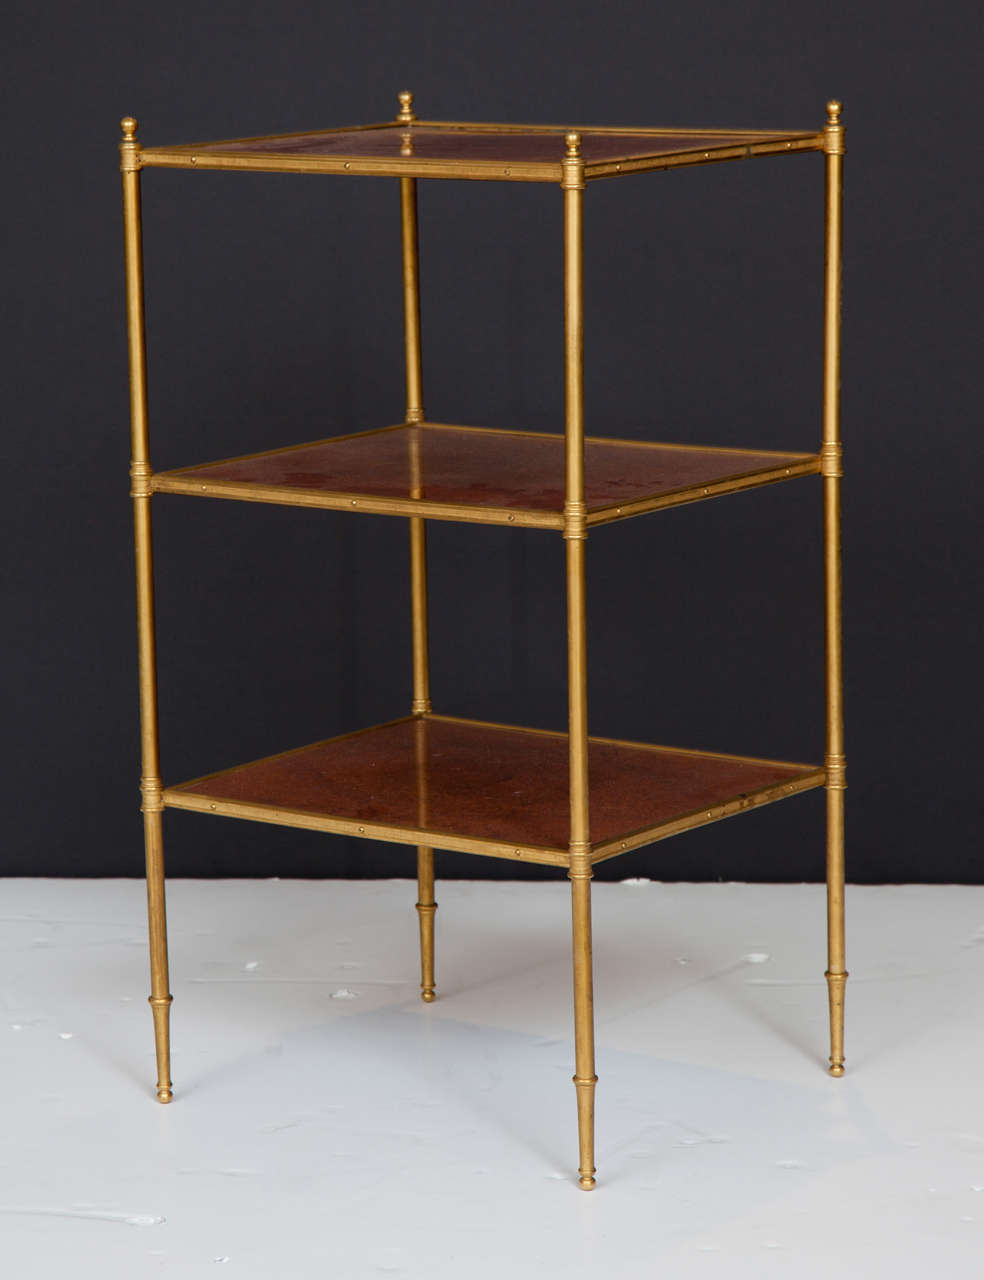 A striking side/end table in bronze and lacquered walnut.  The bronze frame has beautifully crafted details that give the table a refined elegance.